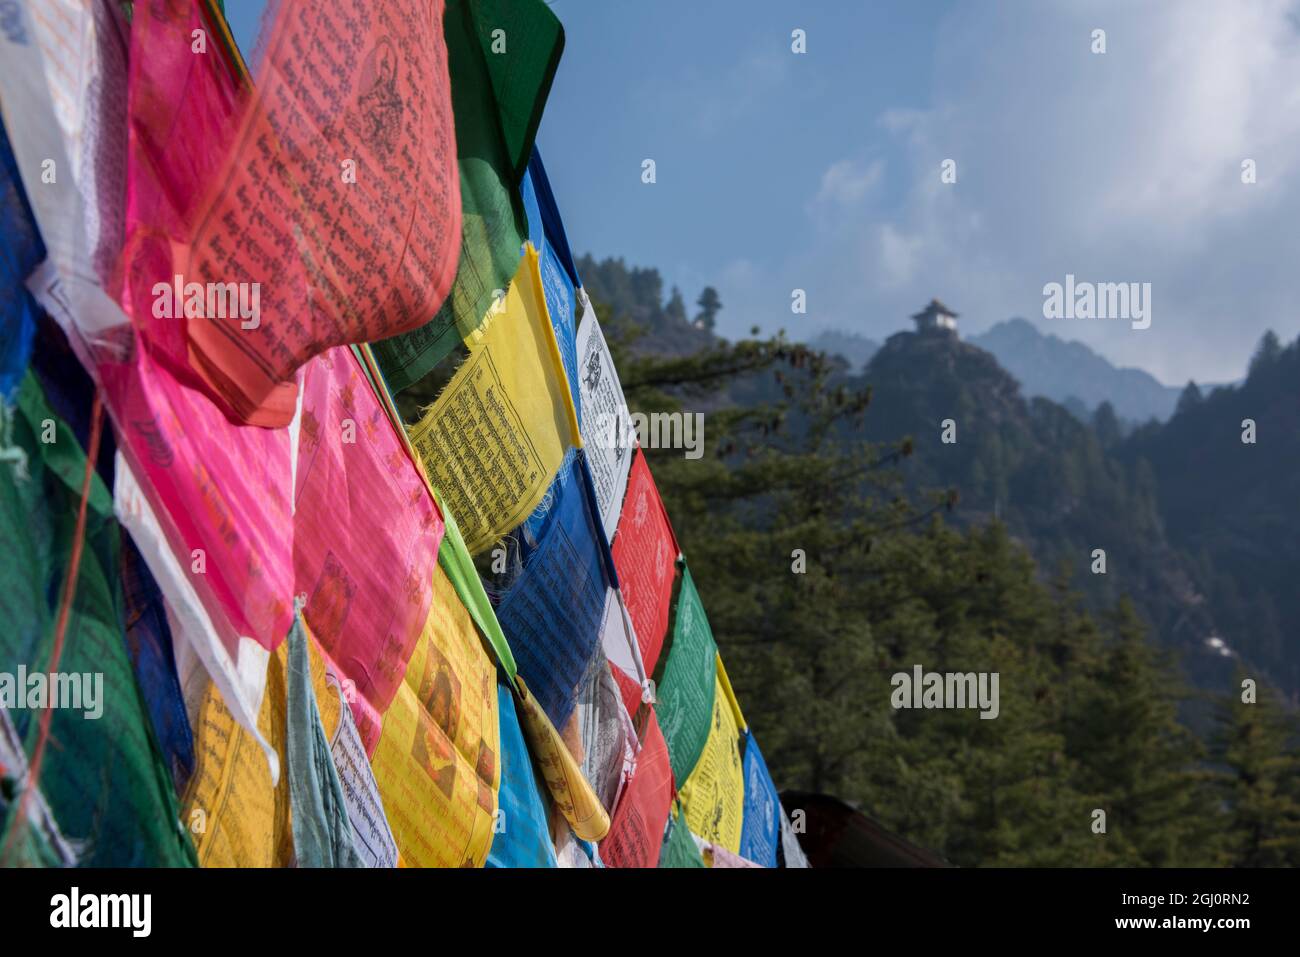 Bhutan, Paro. Colorful prayer flages in front of small outbuilding of the Tiger's Nest, sacred Himalayan Buddhist temple complex. Stock Photo